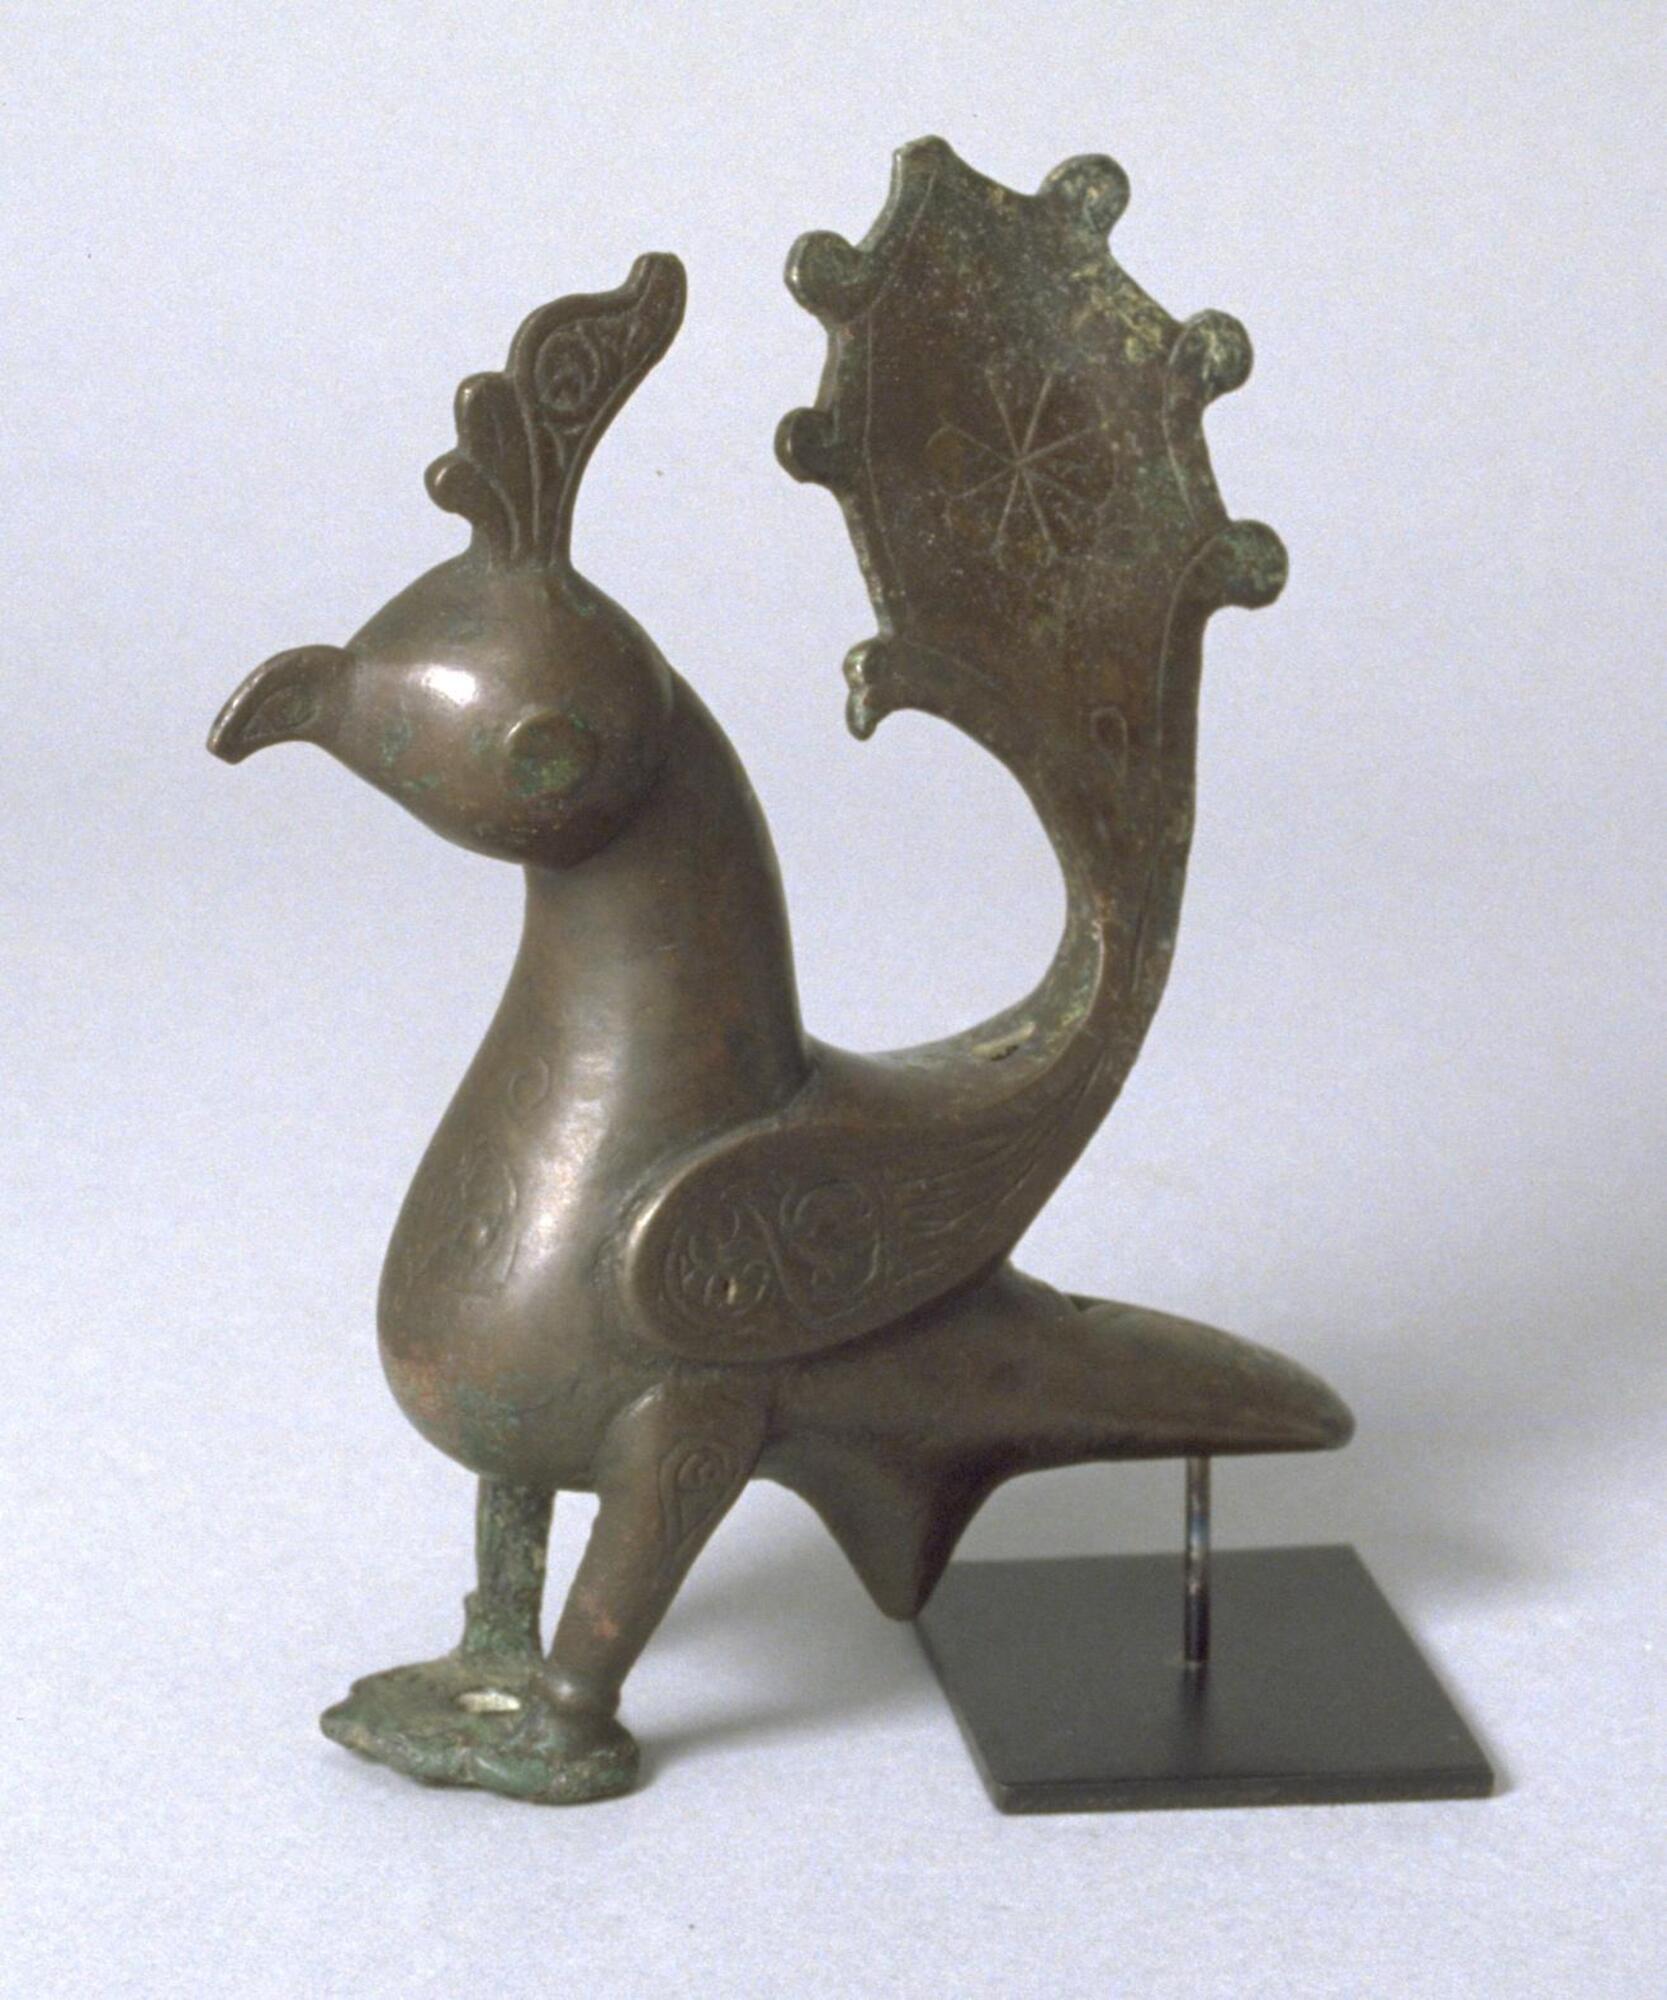 A bronze statue in the shape of a peacock, this piece has engraved decorations and is made in the Seljuk style of metalwork.